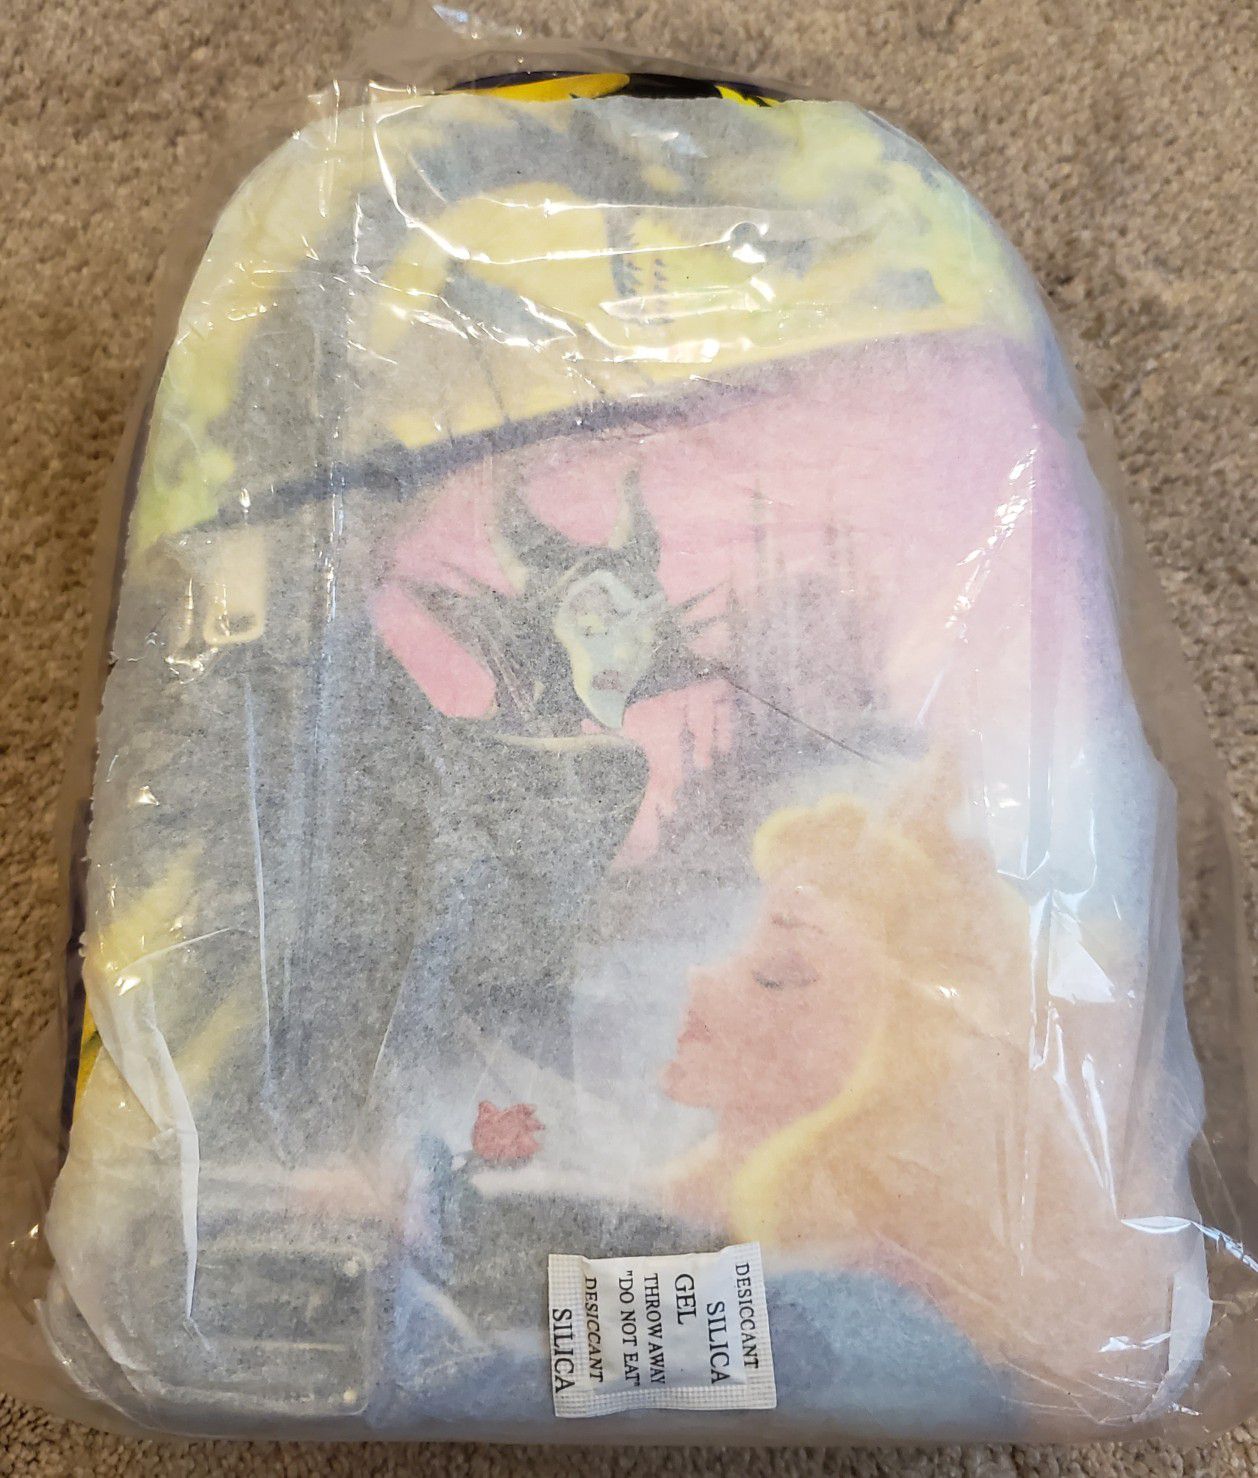 Disney Loungefly Sleeping Beauty Backpack Cast Member Exclusive. LE 600